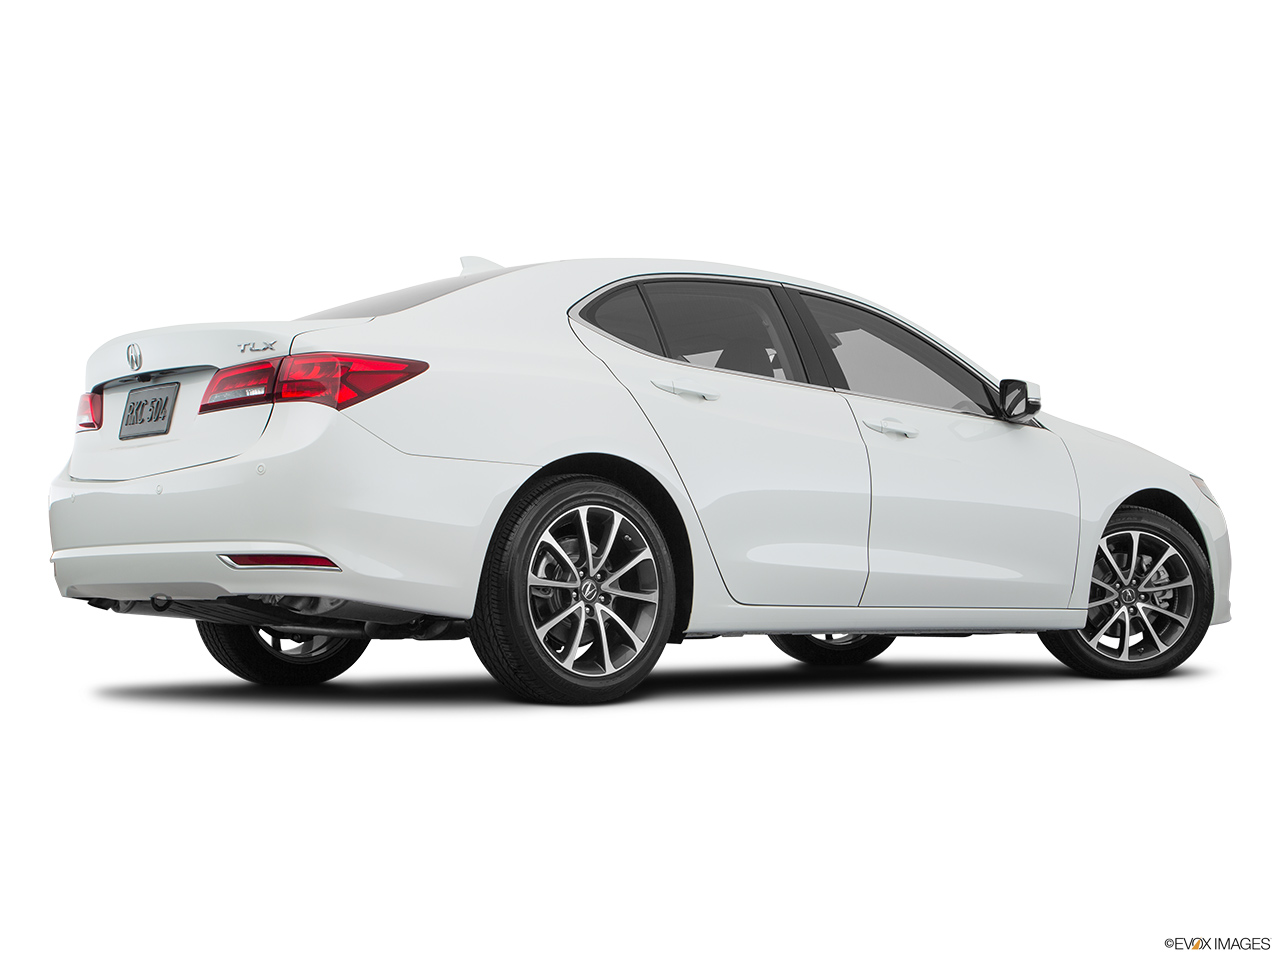 2017 Acura TLX 3.5L Low/wide rear 5/8. 